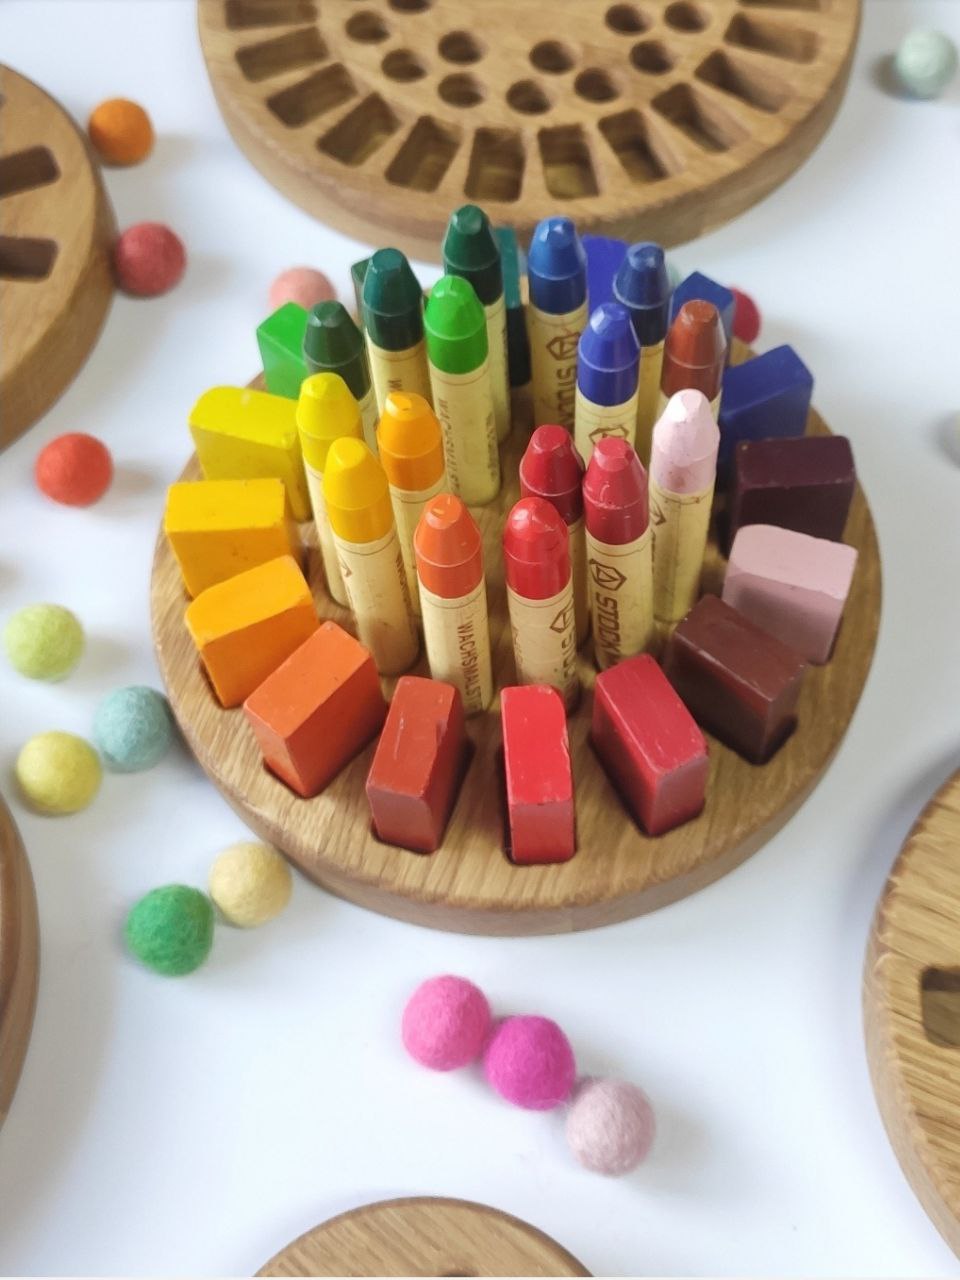 Waldorf Crayon round holder for Stockmar 16 Blocks and 16 Sticks, without crayons, crayon keeper, desk organization, gift for kids